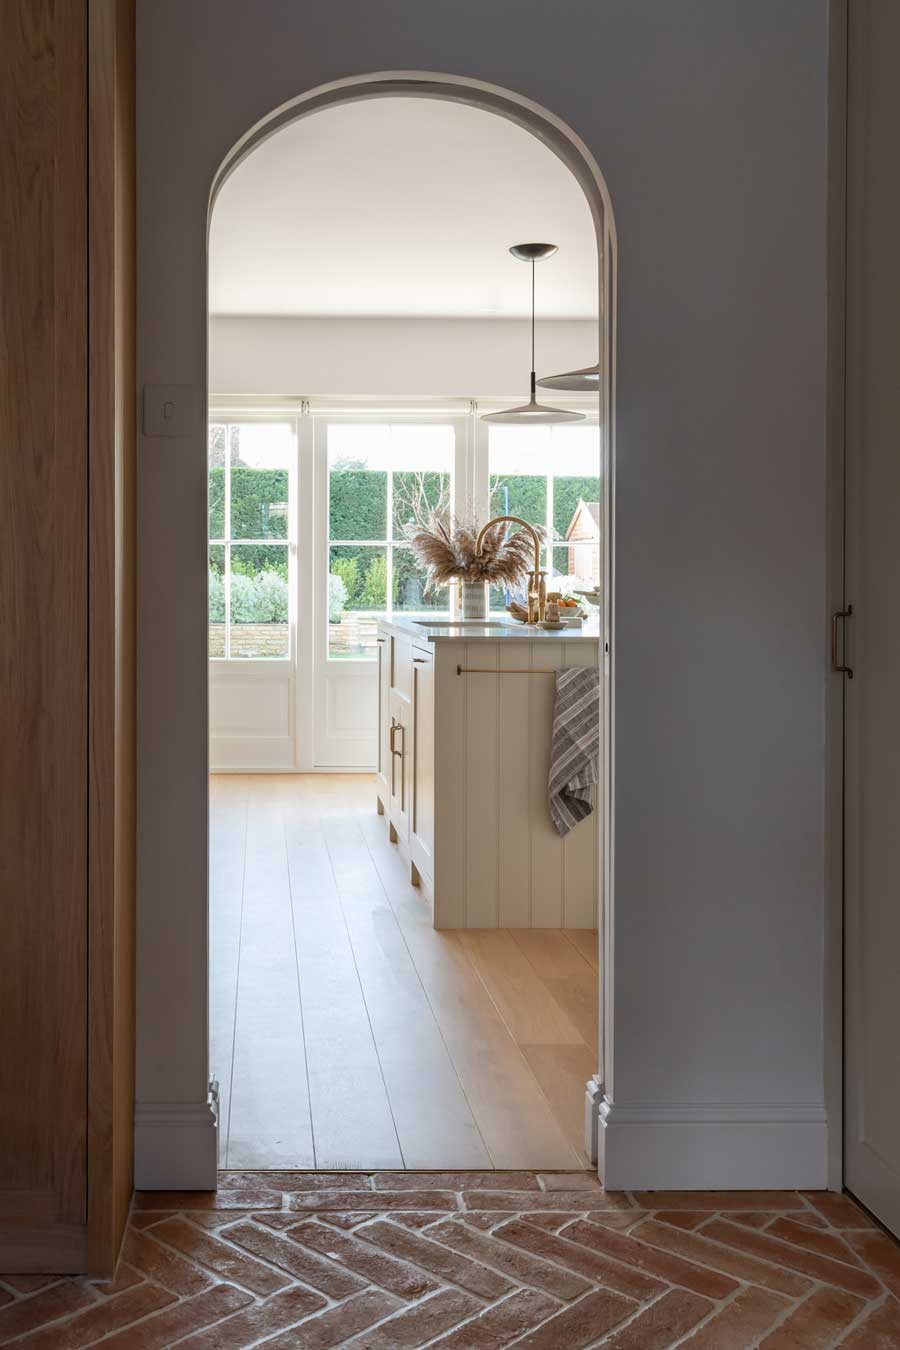 The Arundel Kitchen by Shere Kitchens - beautiful kitchens handmade in Shere Guildford Surrey